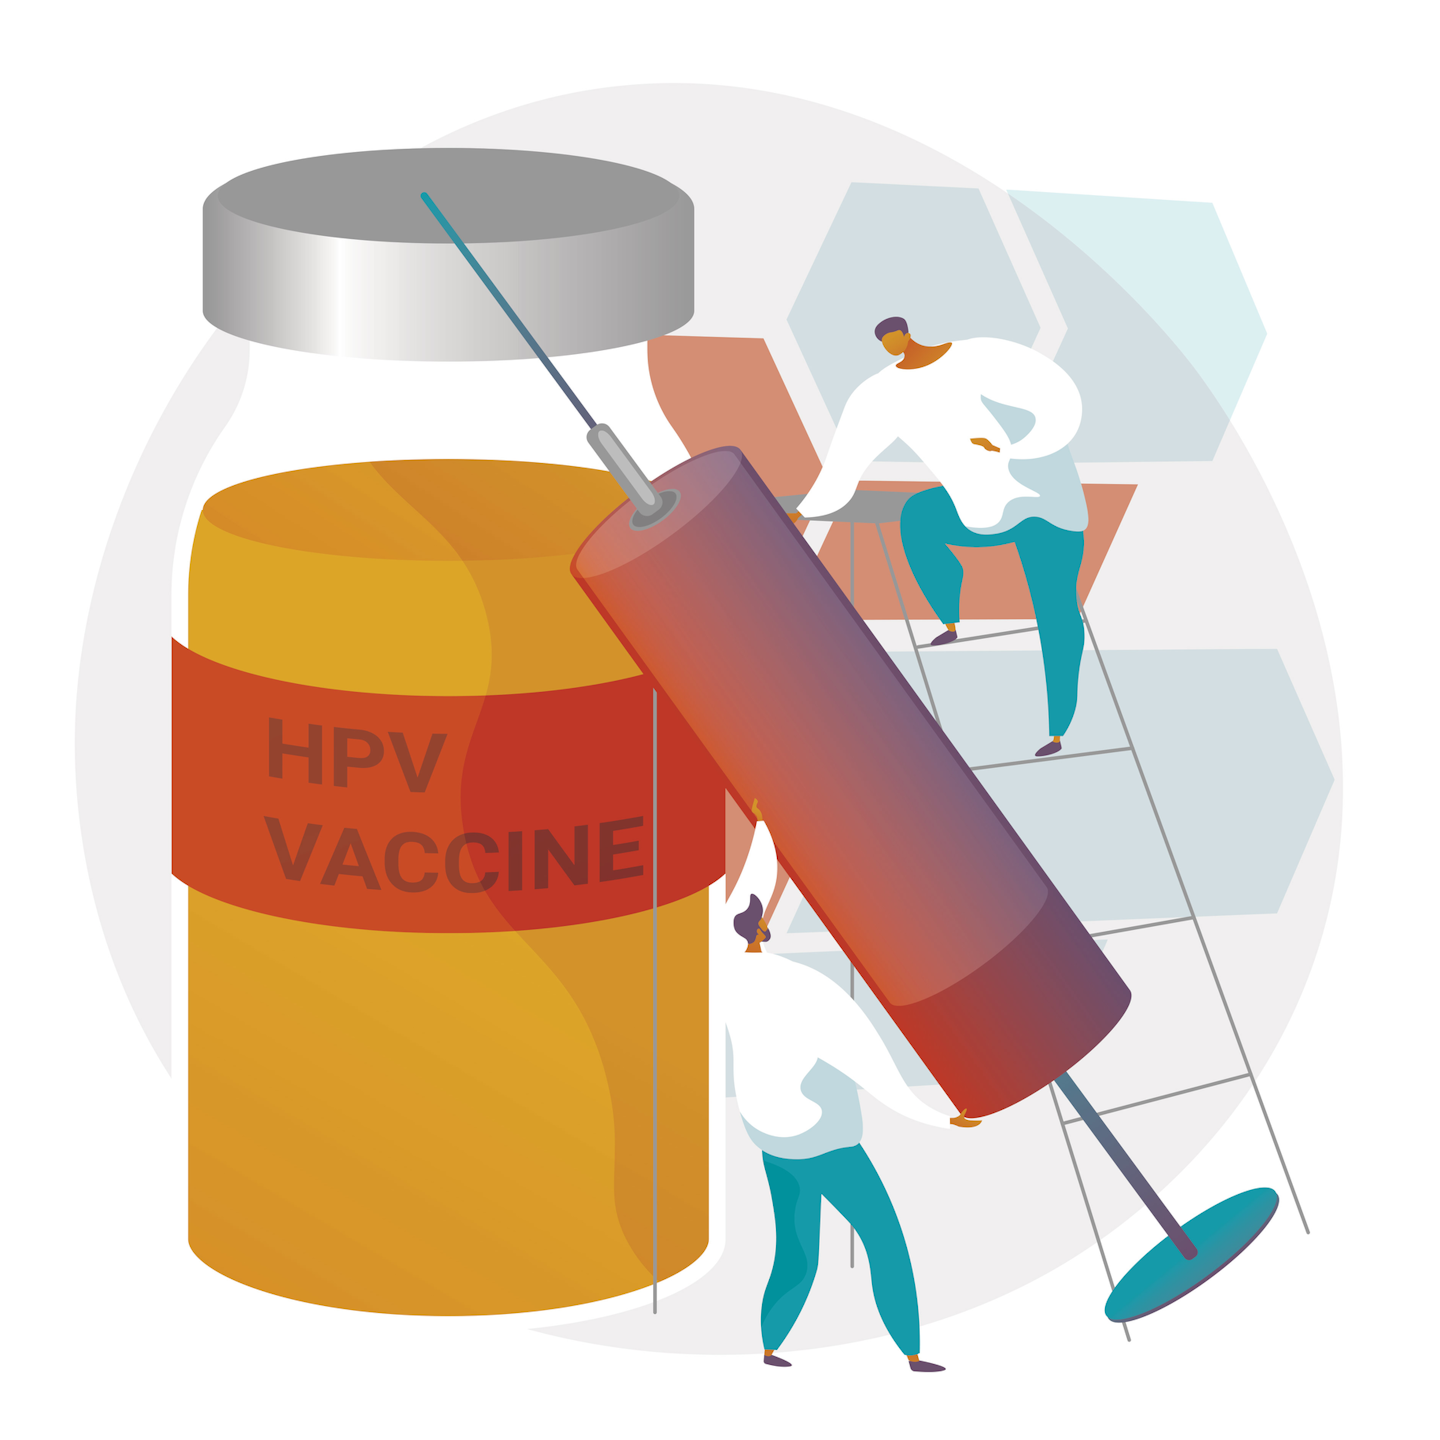 Hpv vaccine prevent throat cancer